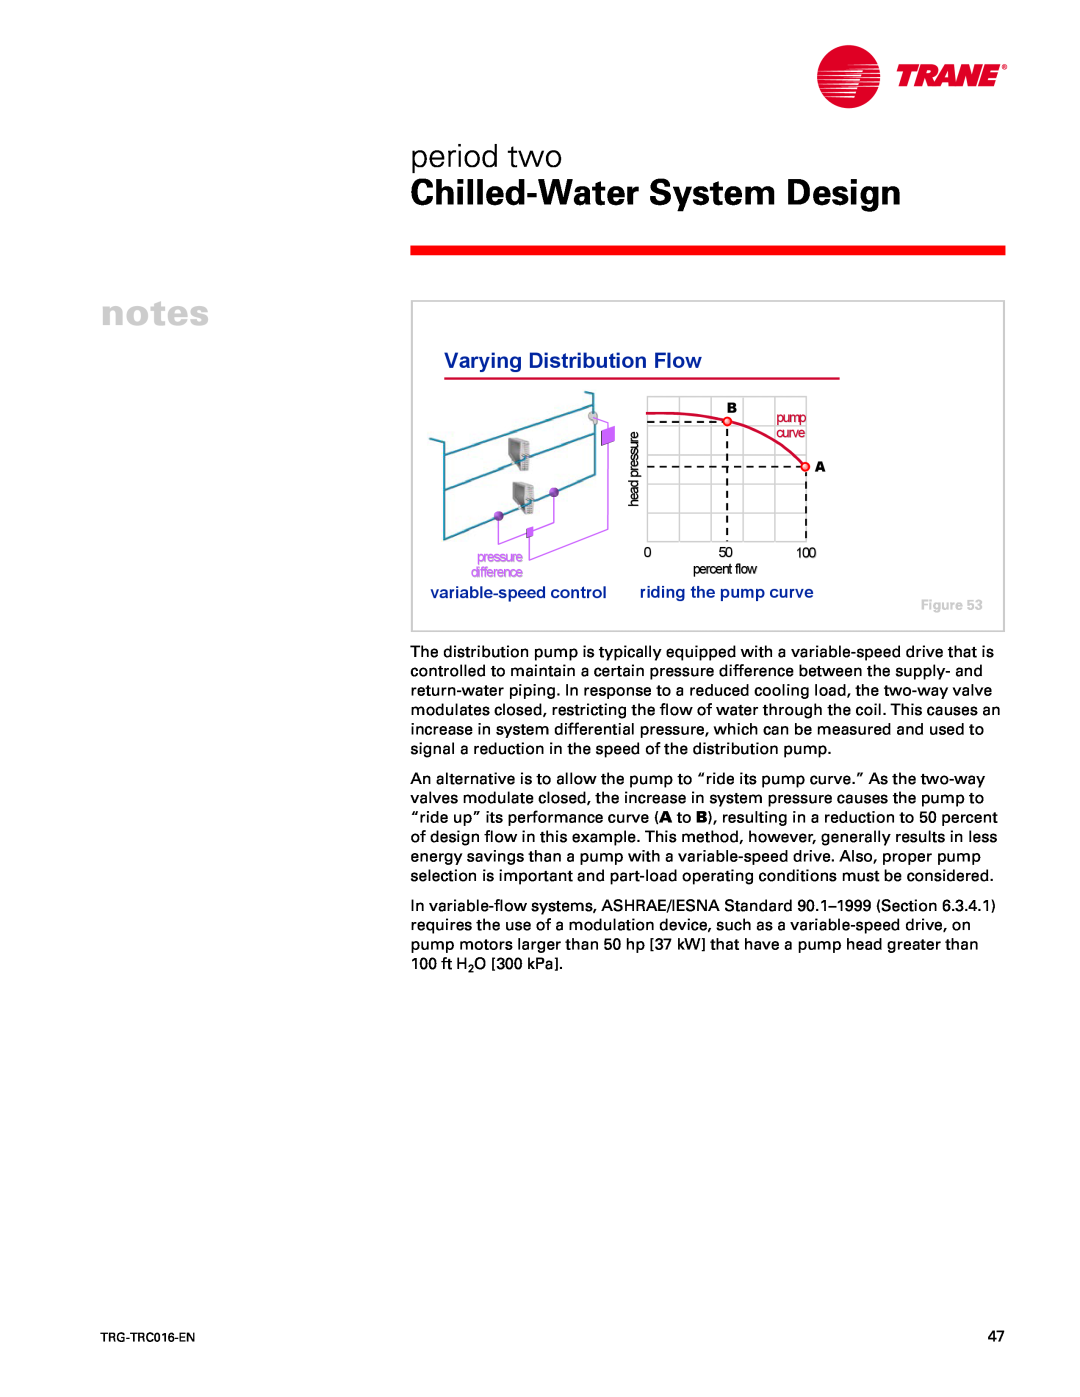 Trane TRG-TRC016-EN manual Varying Distribution Flow, notes, Chilled-WaterSystem Design, period two 